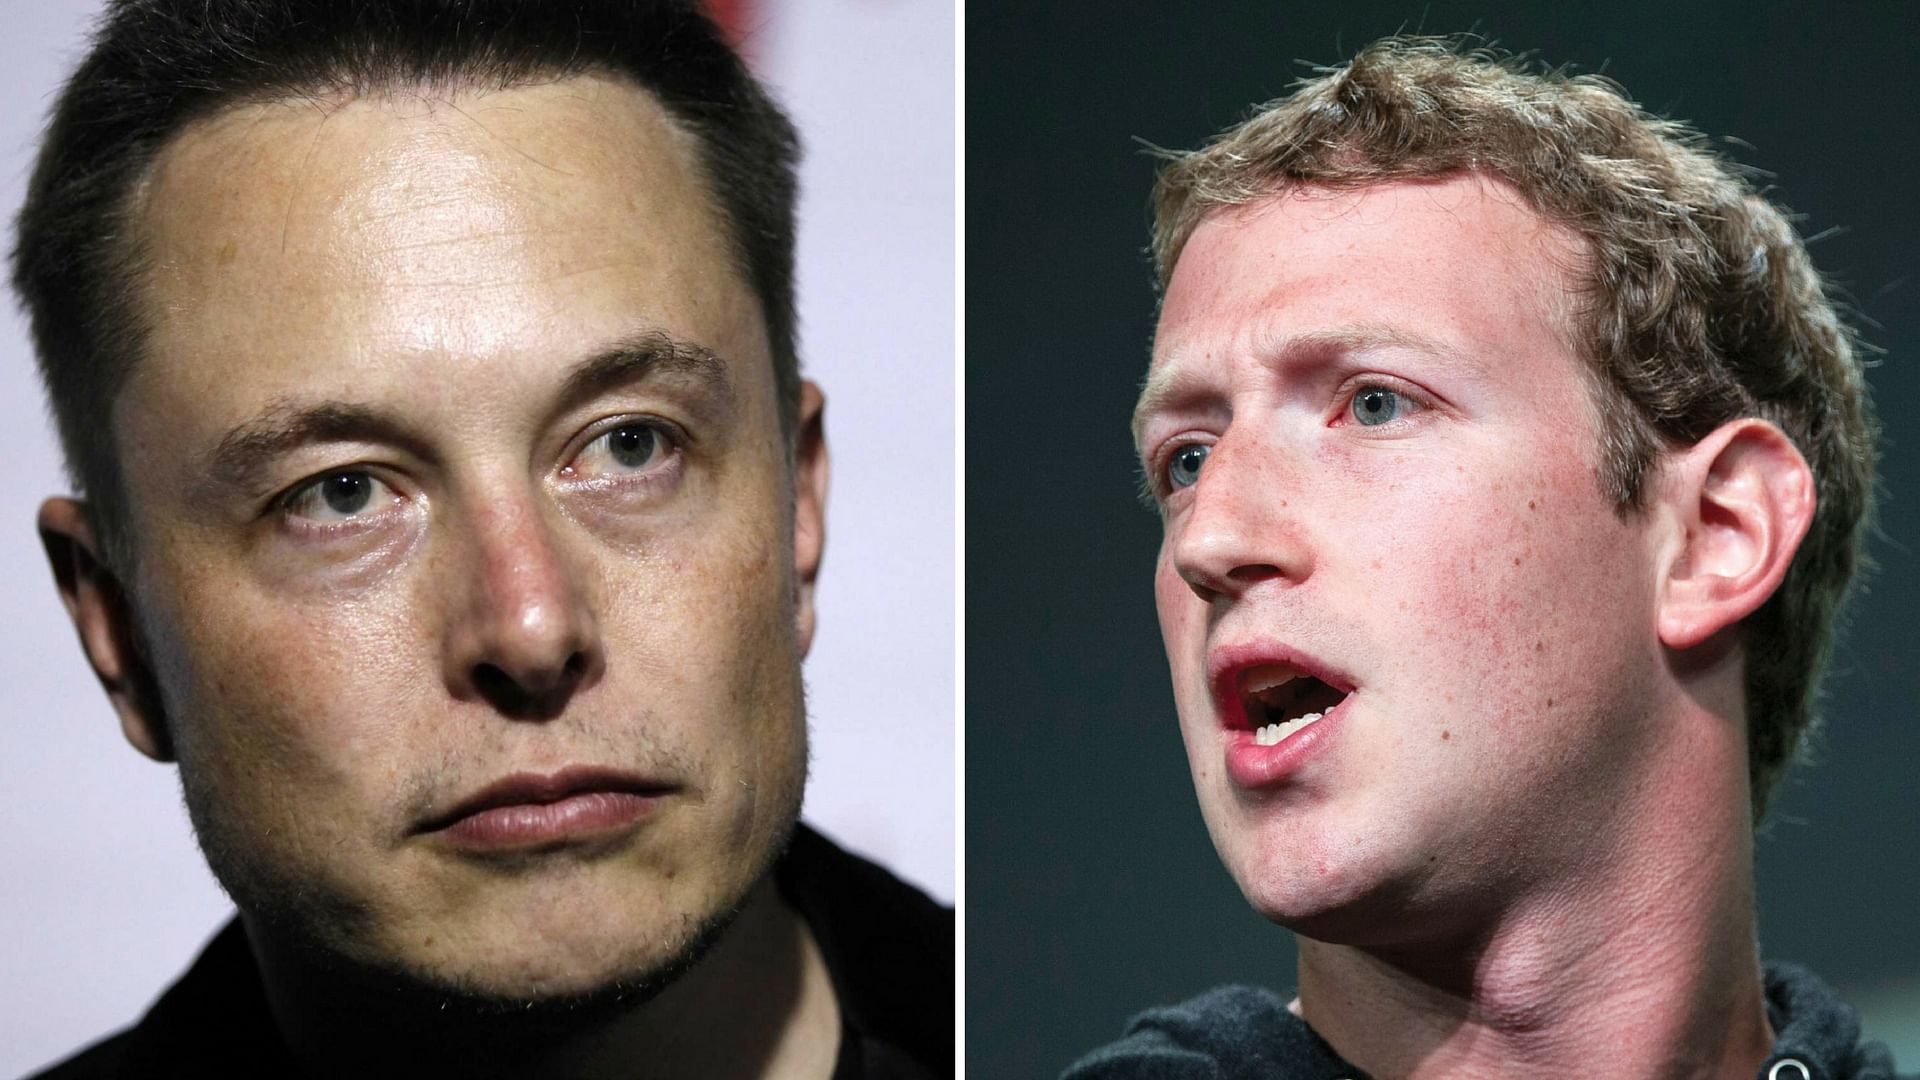 Elon Musk (left) and Mark Zuckerberg (right) have strong words to say.&nbsp;